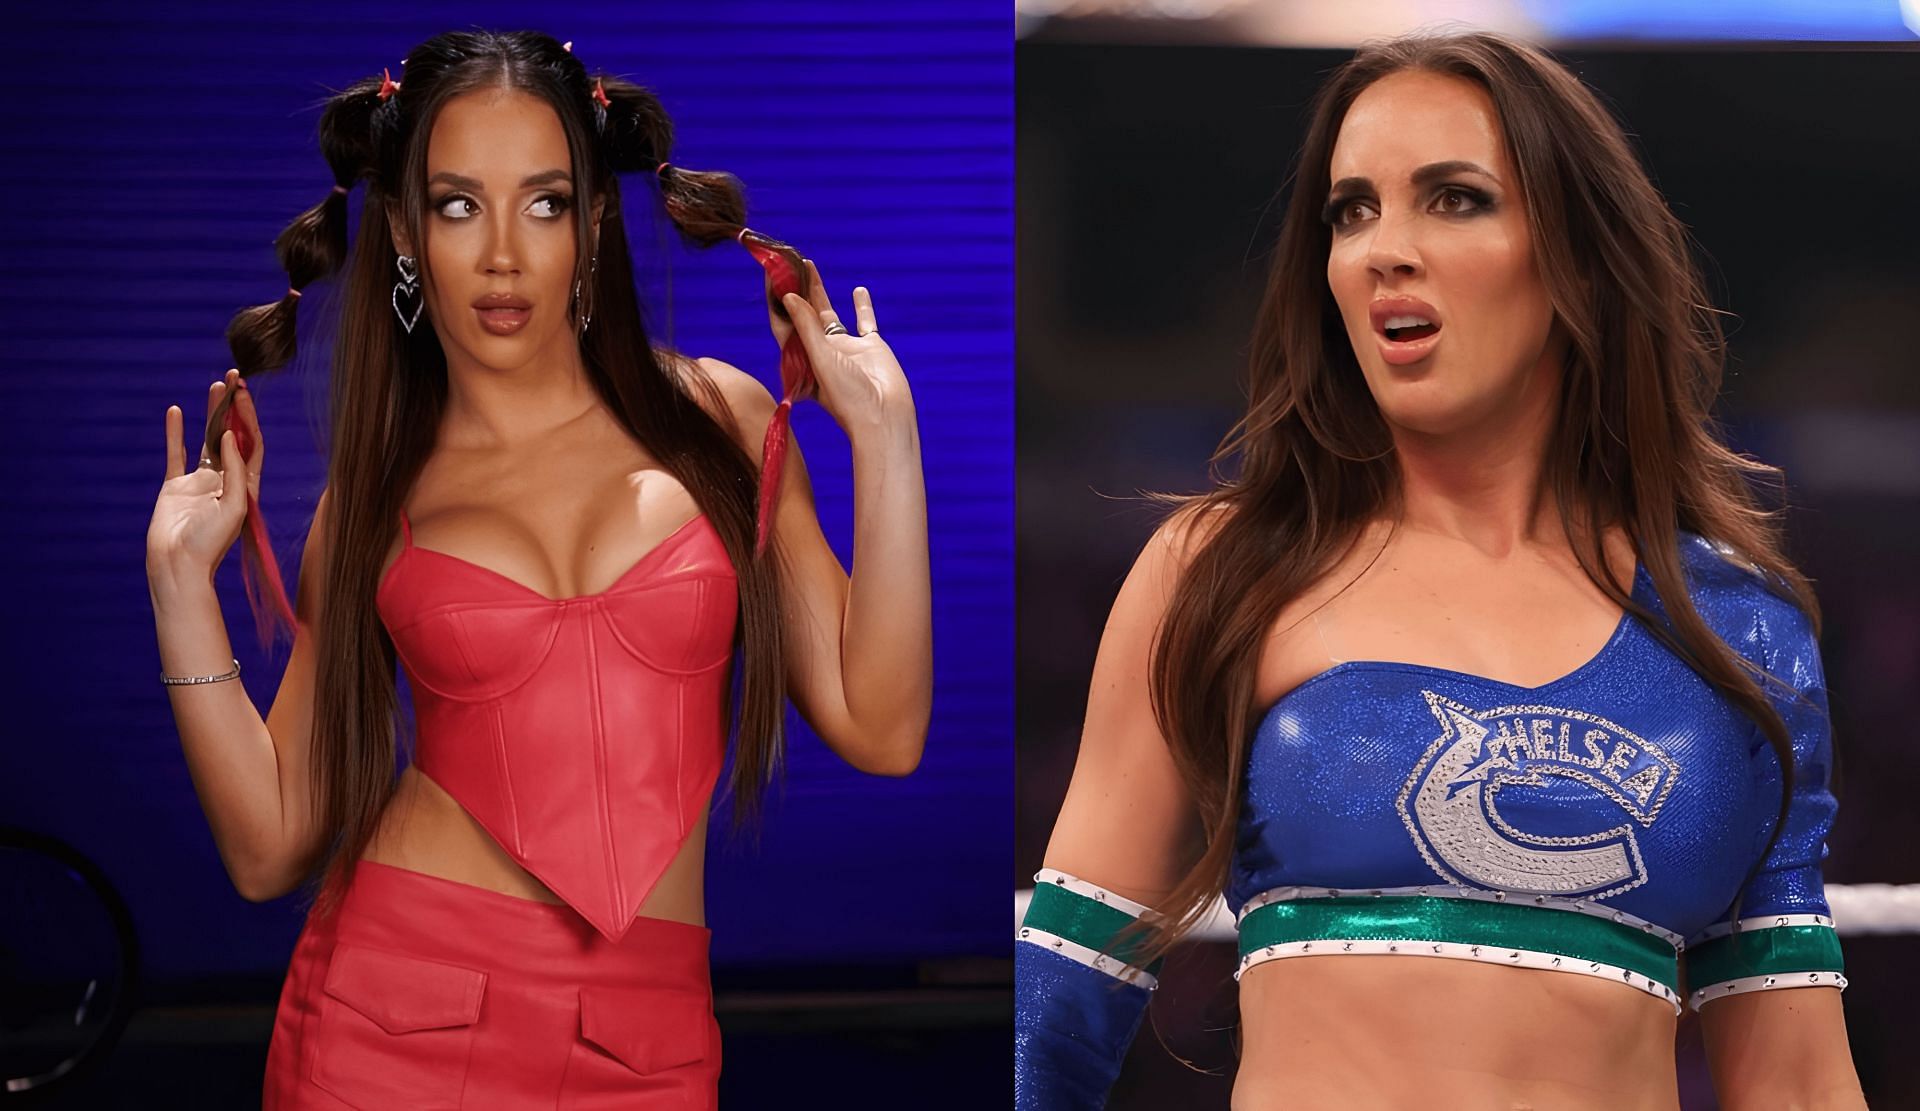 Chelsea Green is currently drafted on RAW